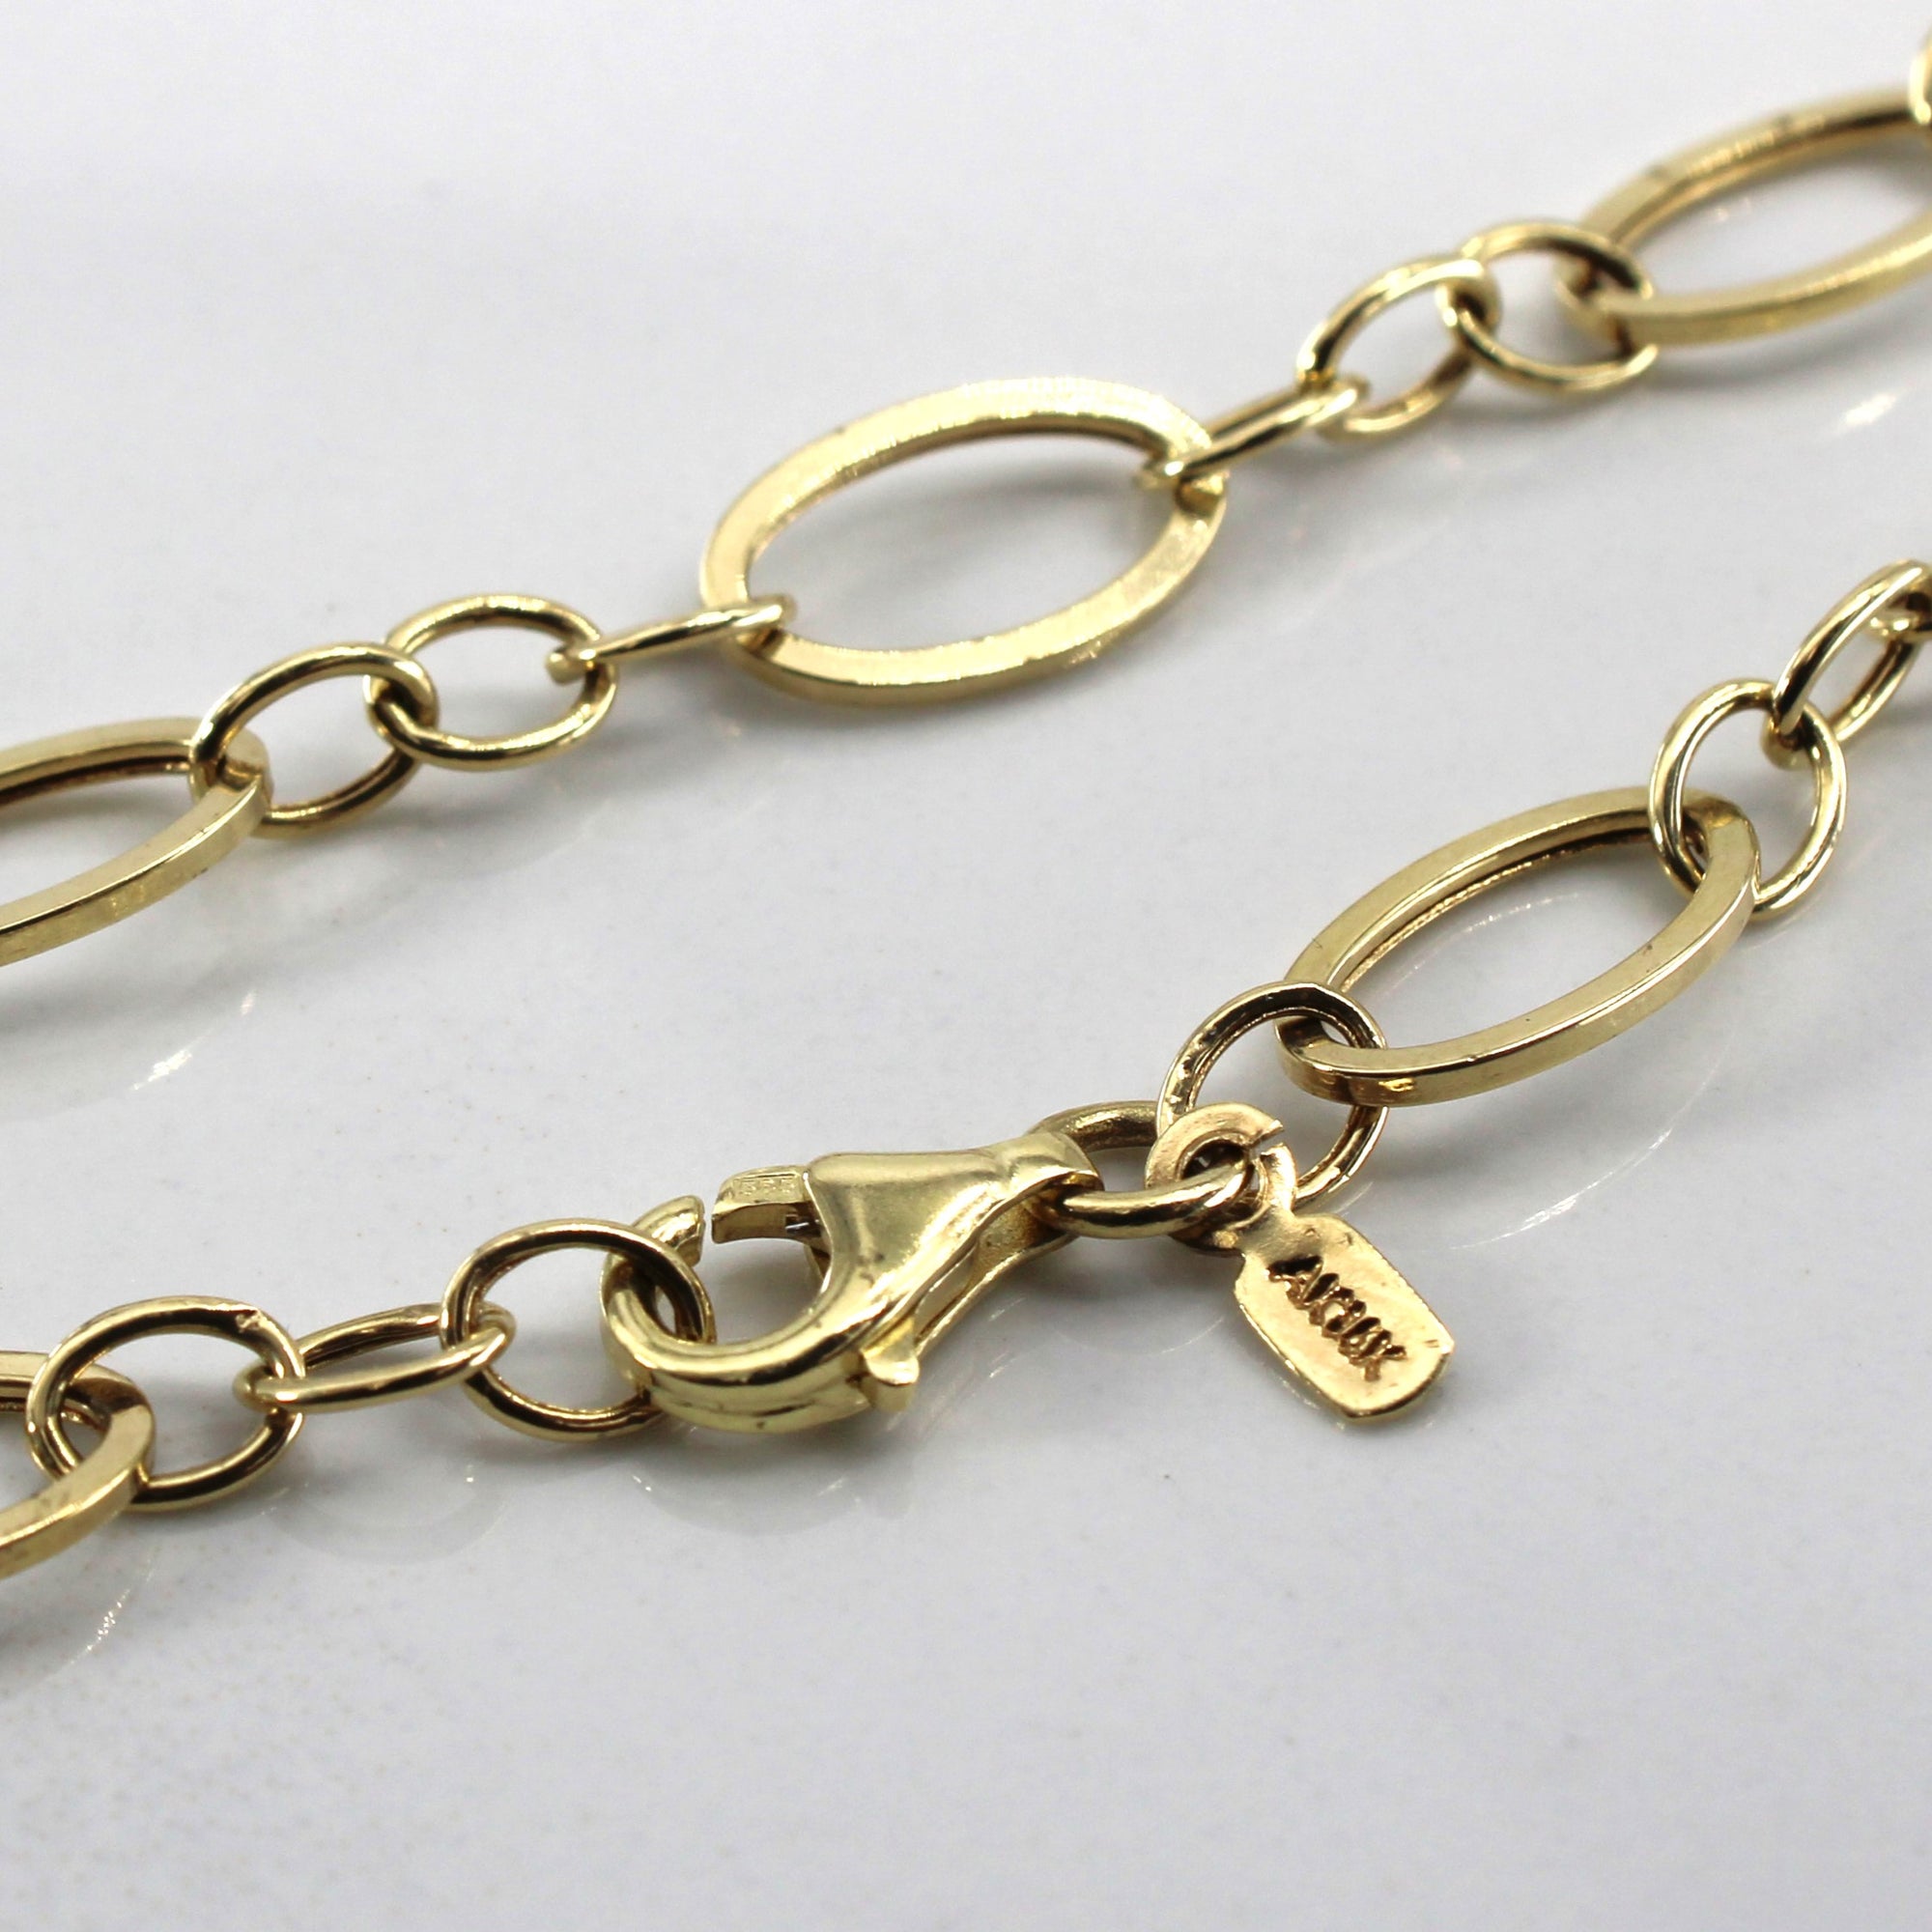 Elongated Rolo Link Long Gold Necklace | 36